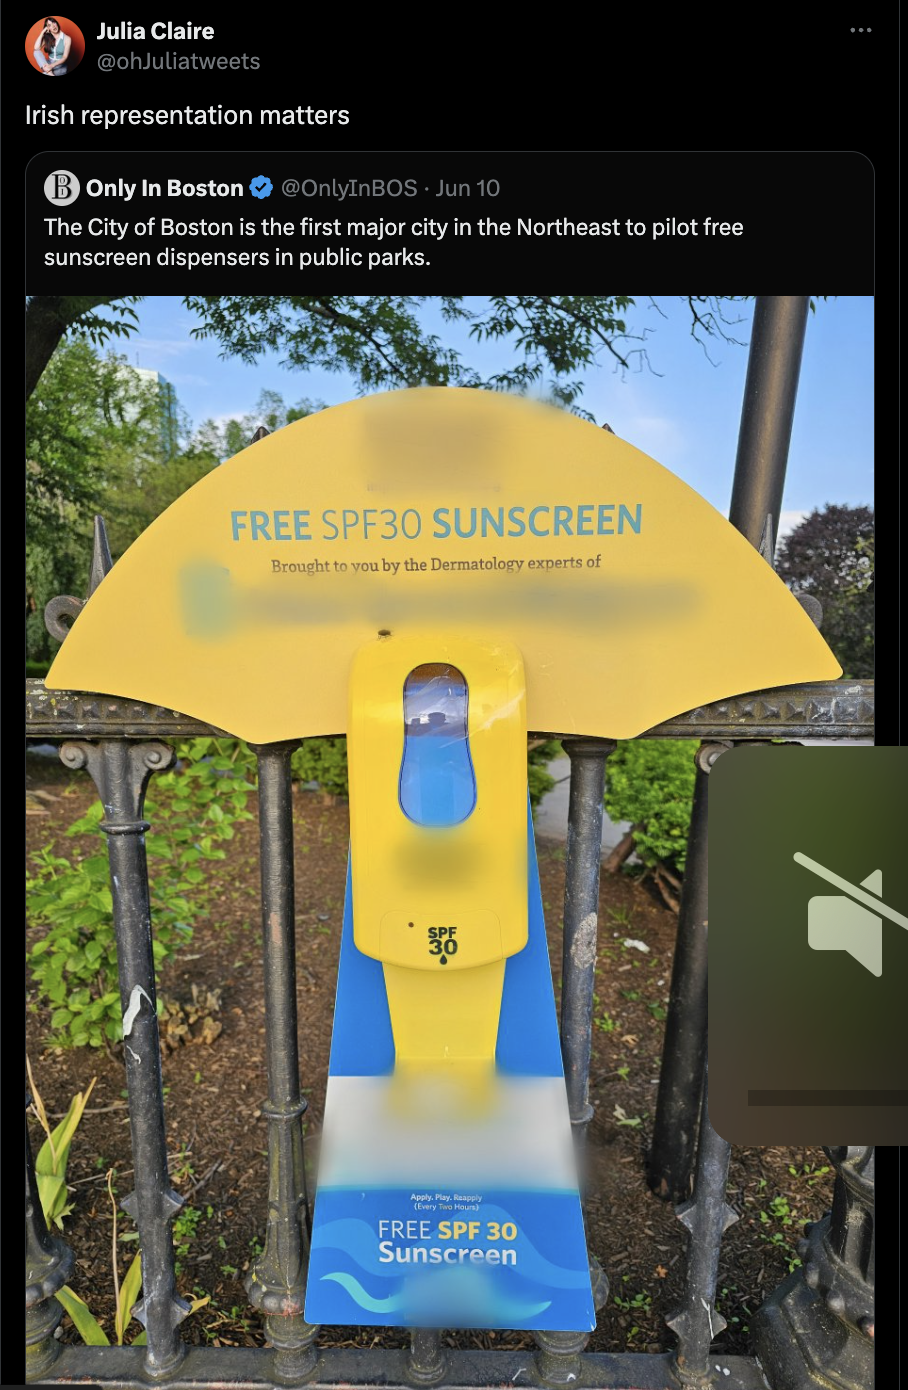 tree - Julia Claire Irish representation matters Only In Boston Jun 10 The City of Boston is the first major city in the Northeast to pilot free sunscreen dispensers in public parks. Free SPF30 Sunscreen ght by the D Free Spf 30 Sunscreen